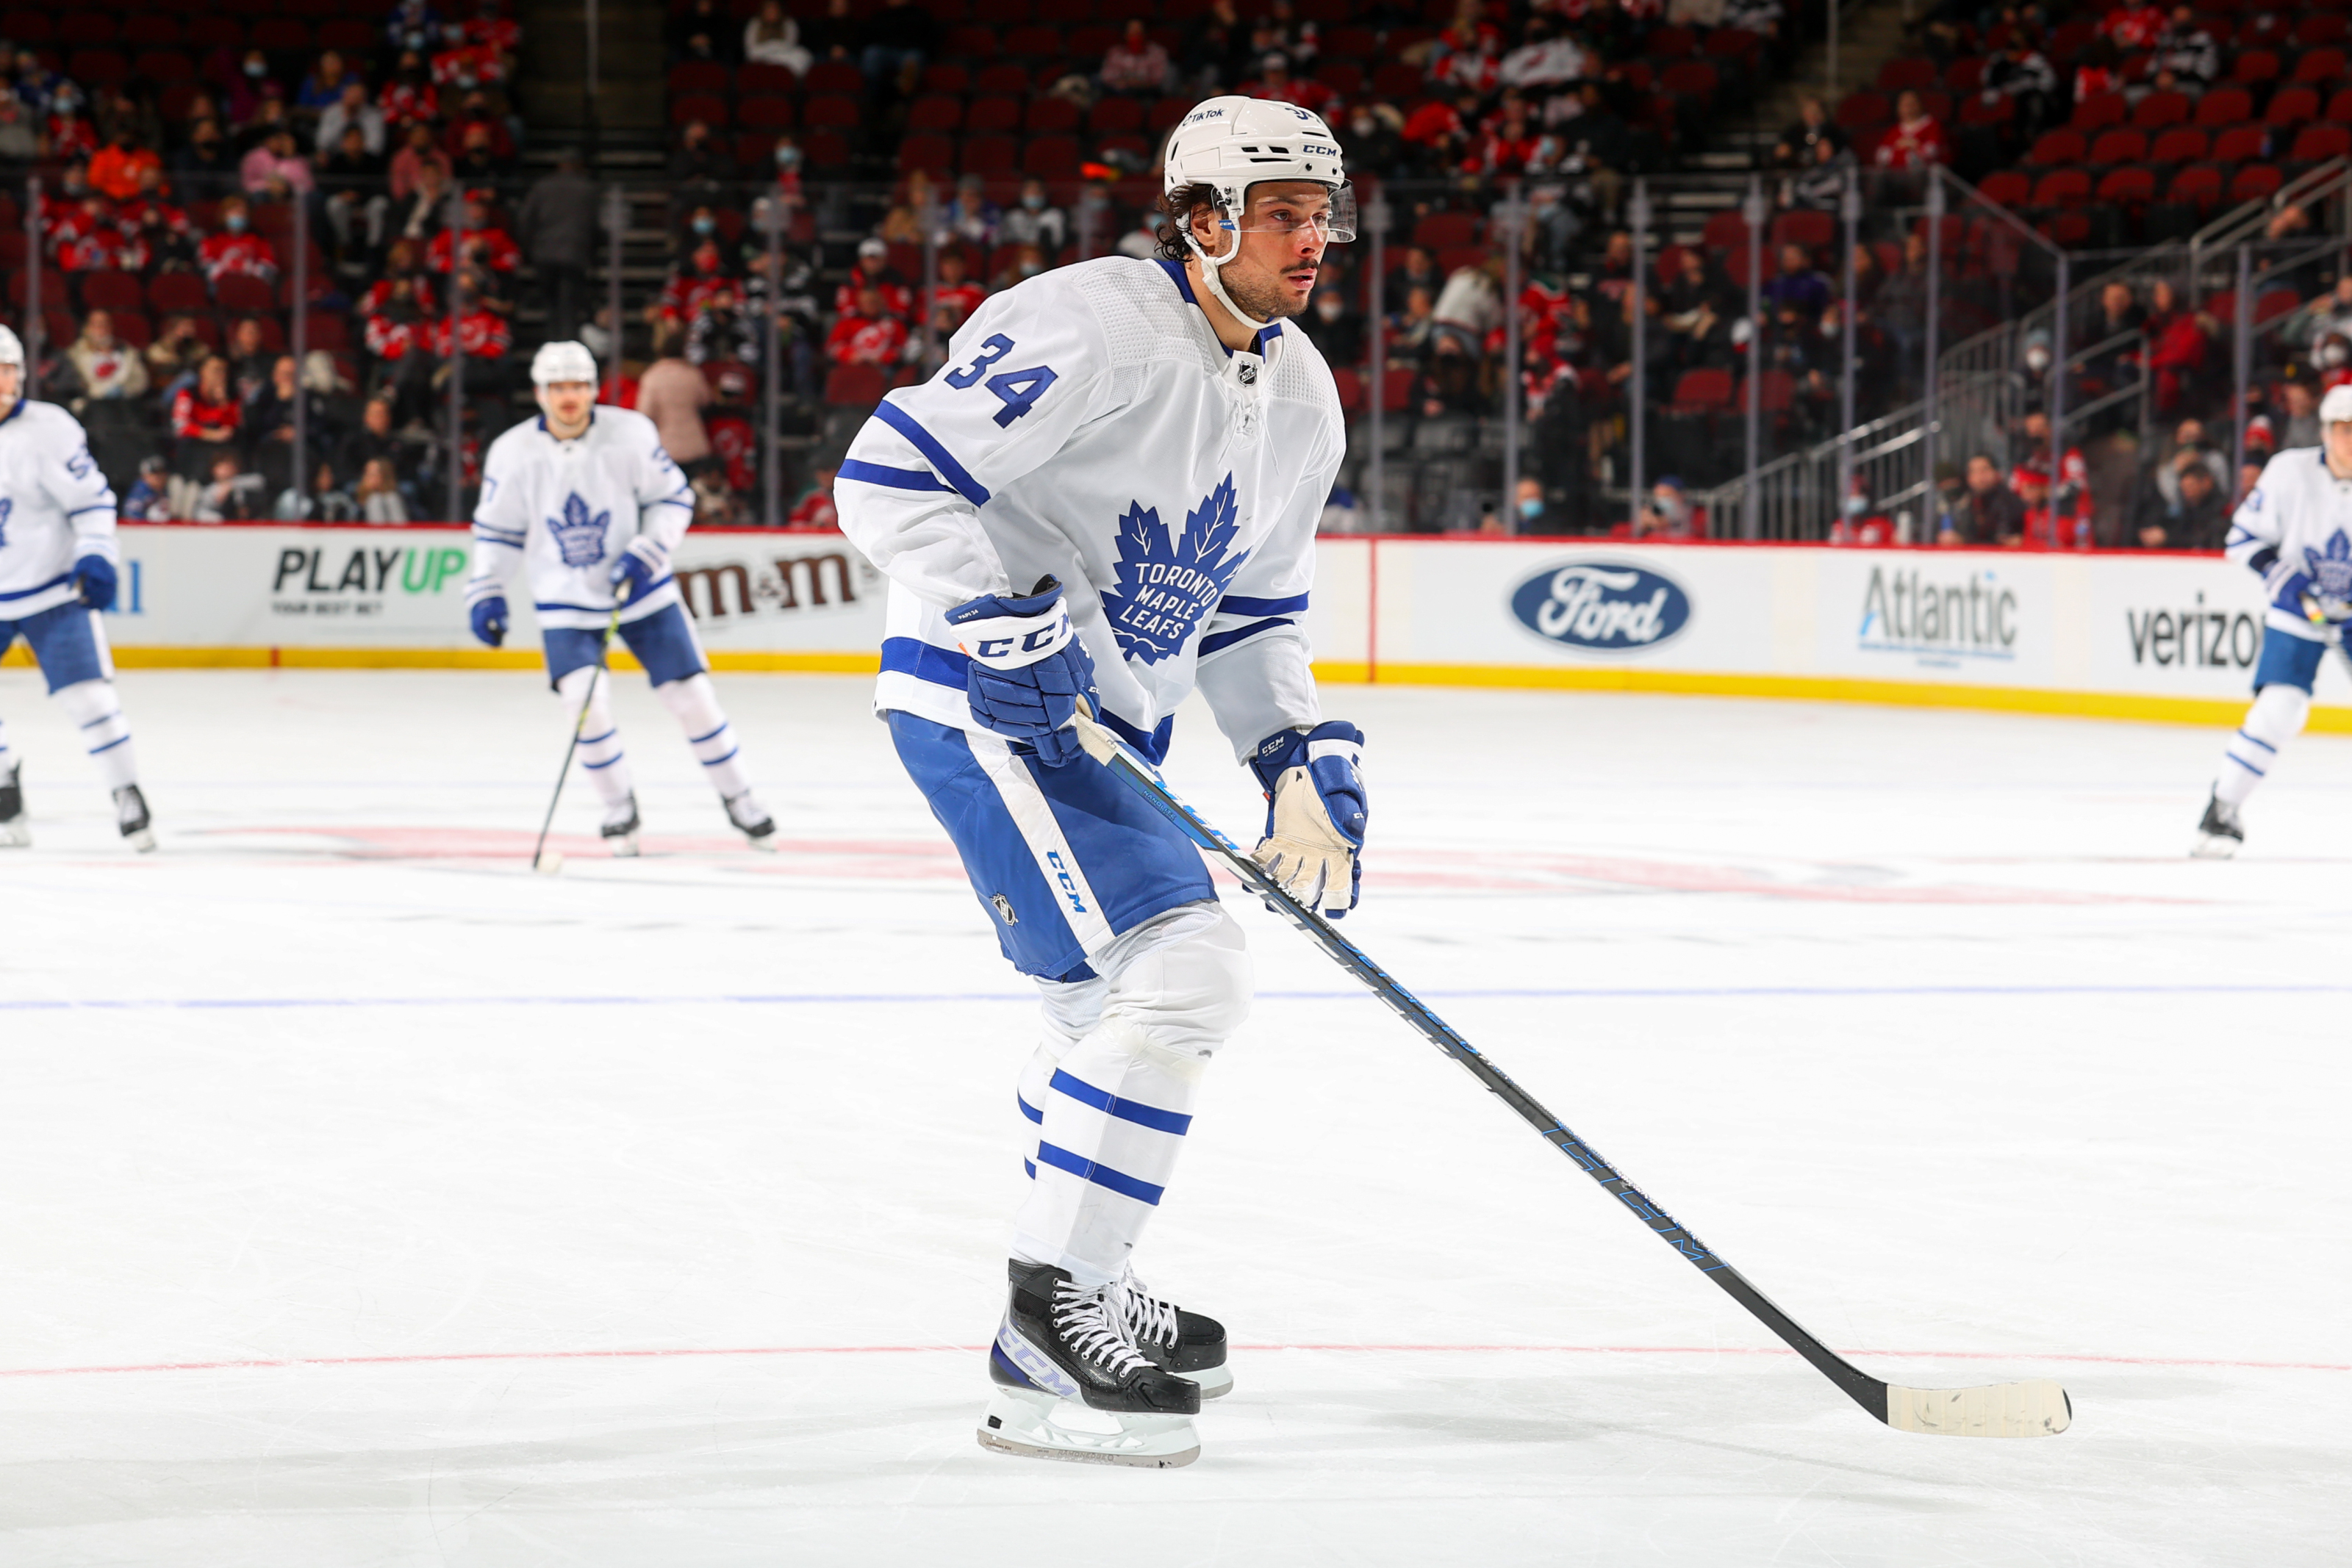 Eliteprospects.com - Toronto Maple Leafs star Auston Matthews has been on a  scoring tear, breaking the 50-goal mark for the first time in his career. •  Tampa Bay Lightning head coach Jon